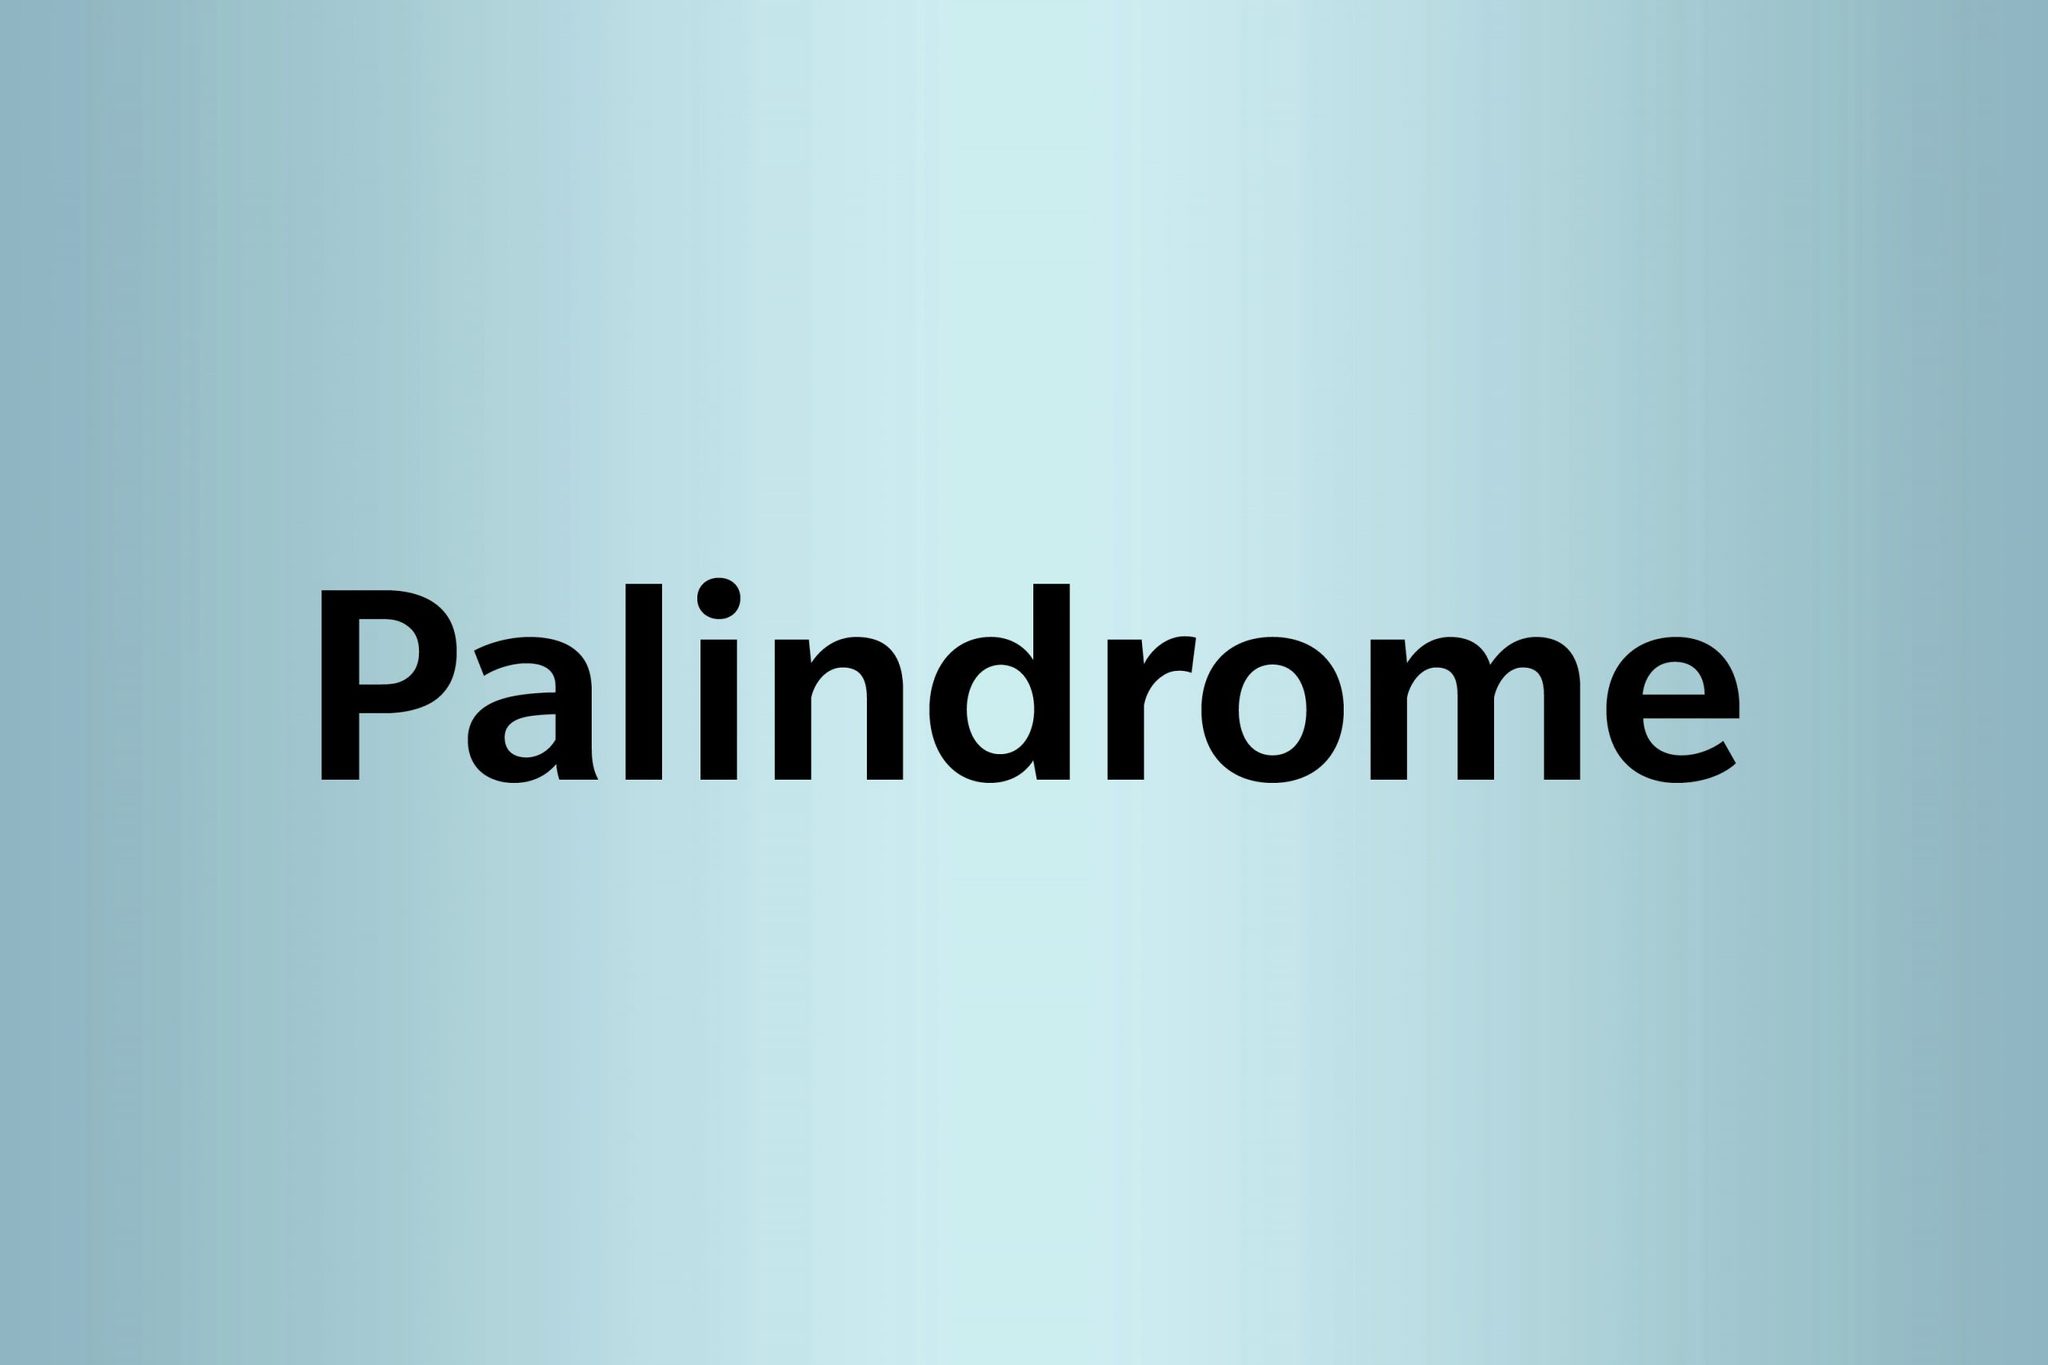 Palindrome Examples 26 Words That Are the Same Backwards and Forwards